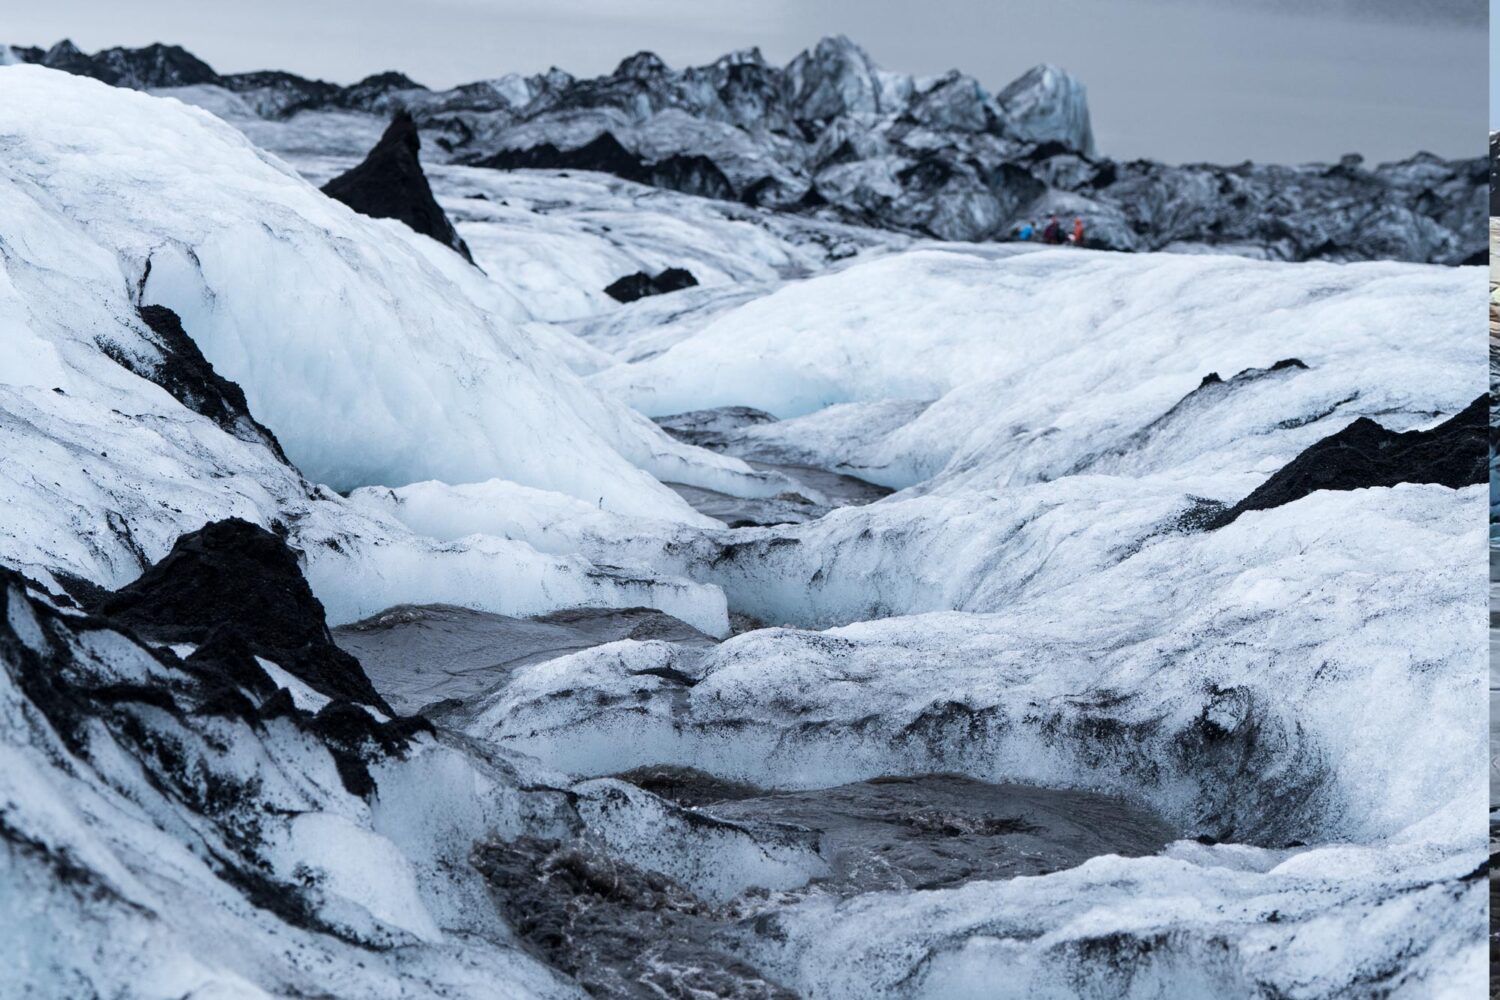 People in a crevasse for a cool photo on the glacier